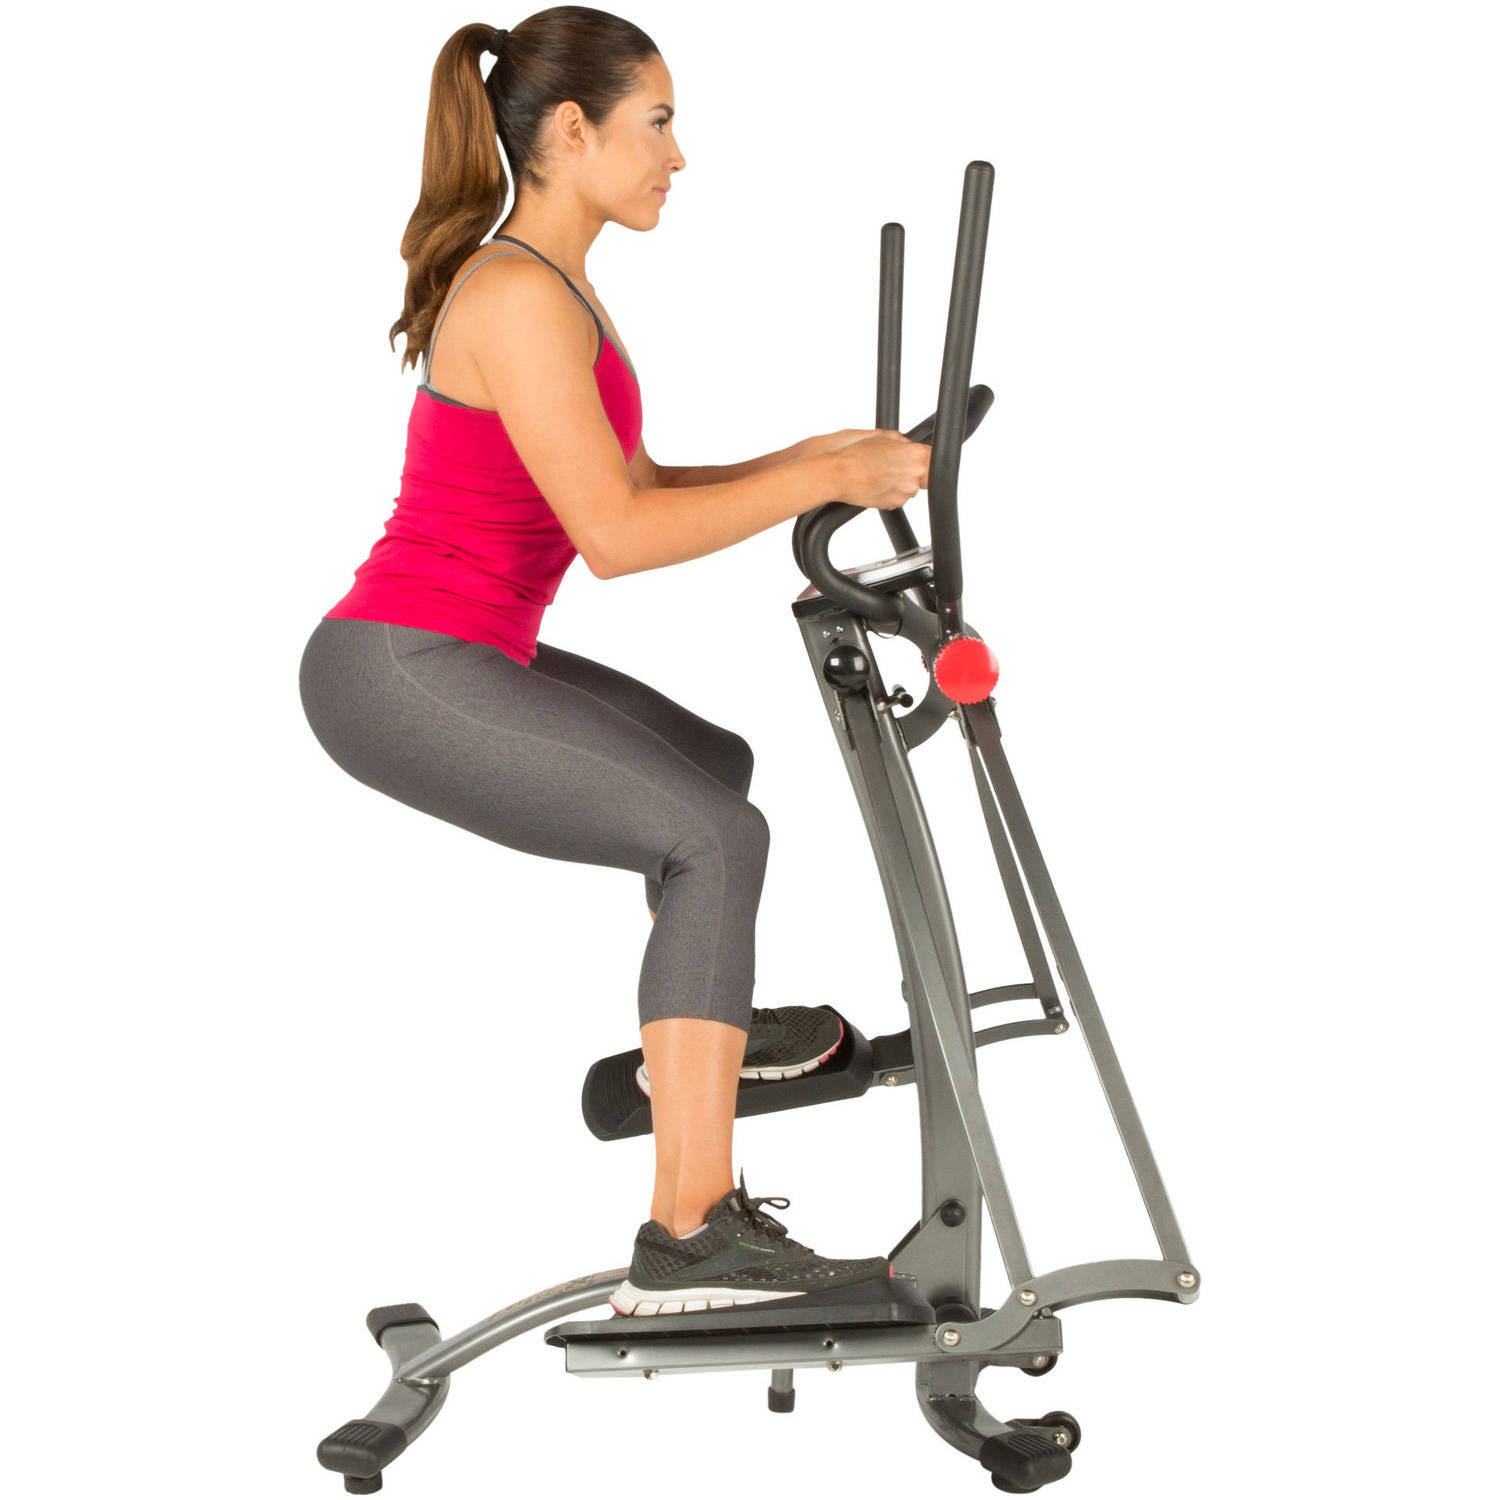 Fitness Reality Multi-Direction Elliptical Cloud Walker X1 with Pulse Sensors - image 13 of 31